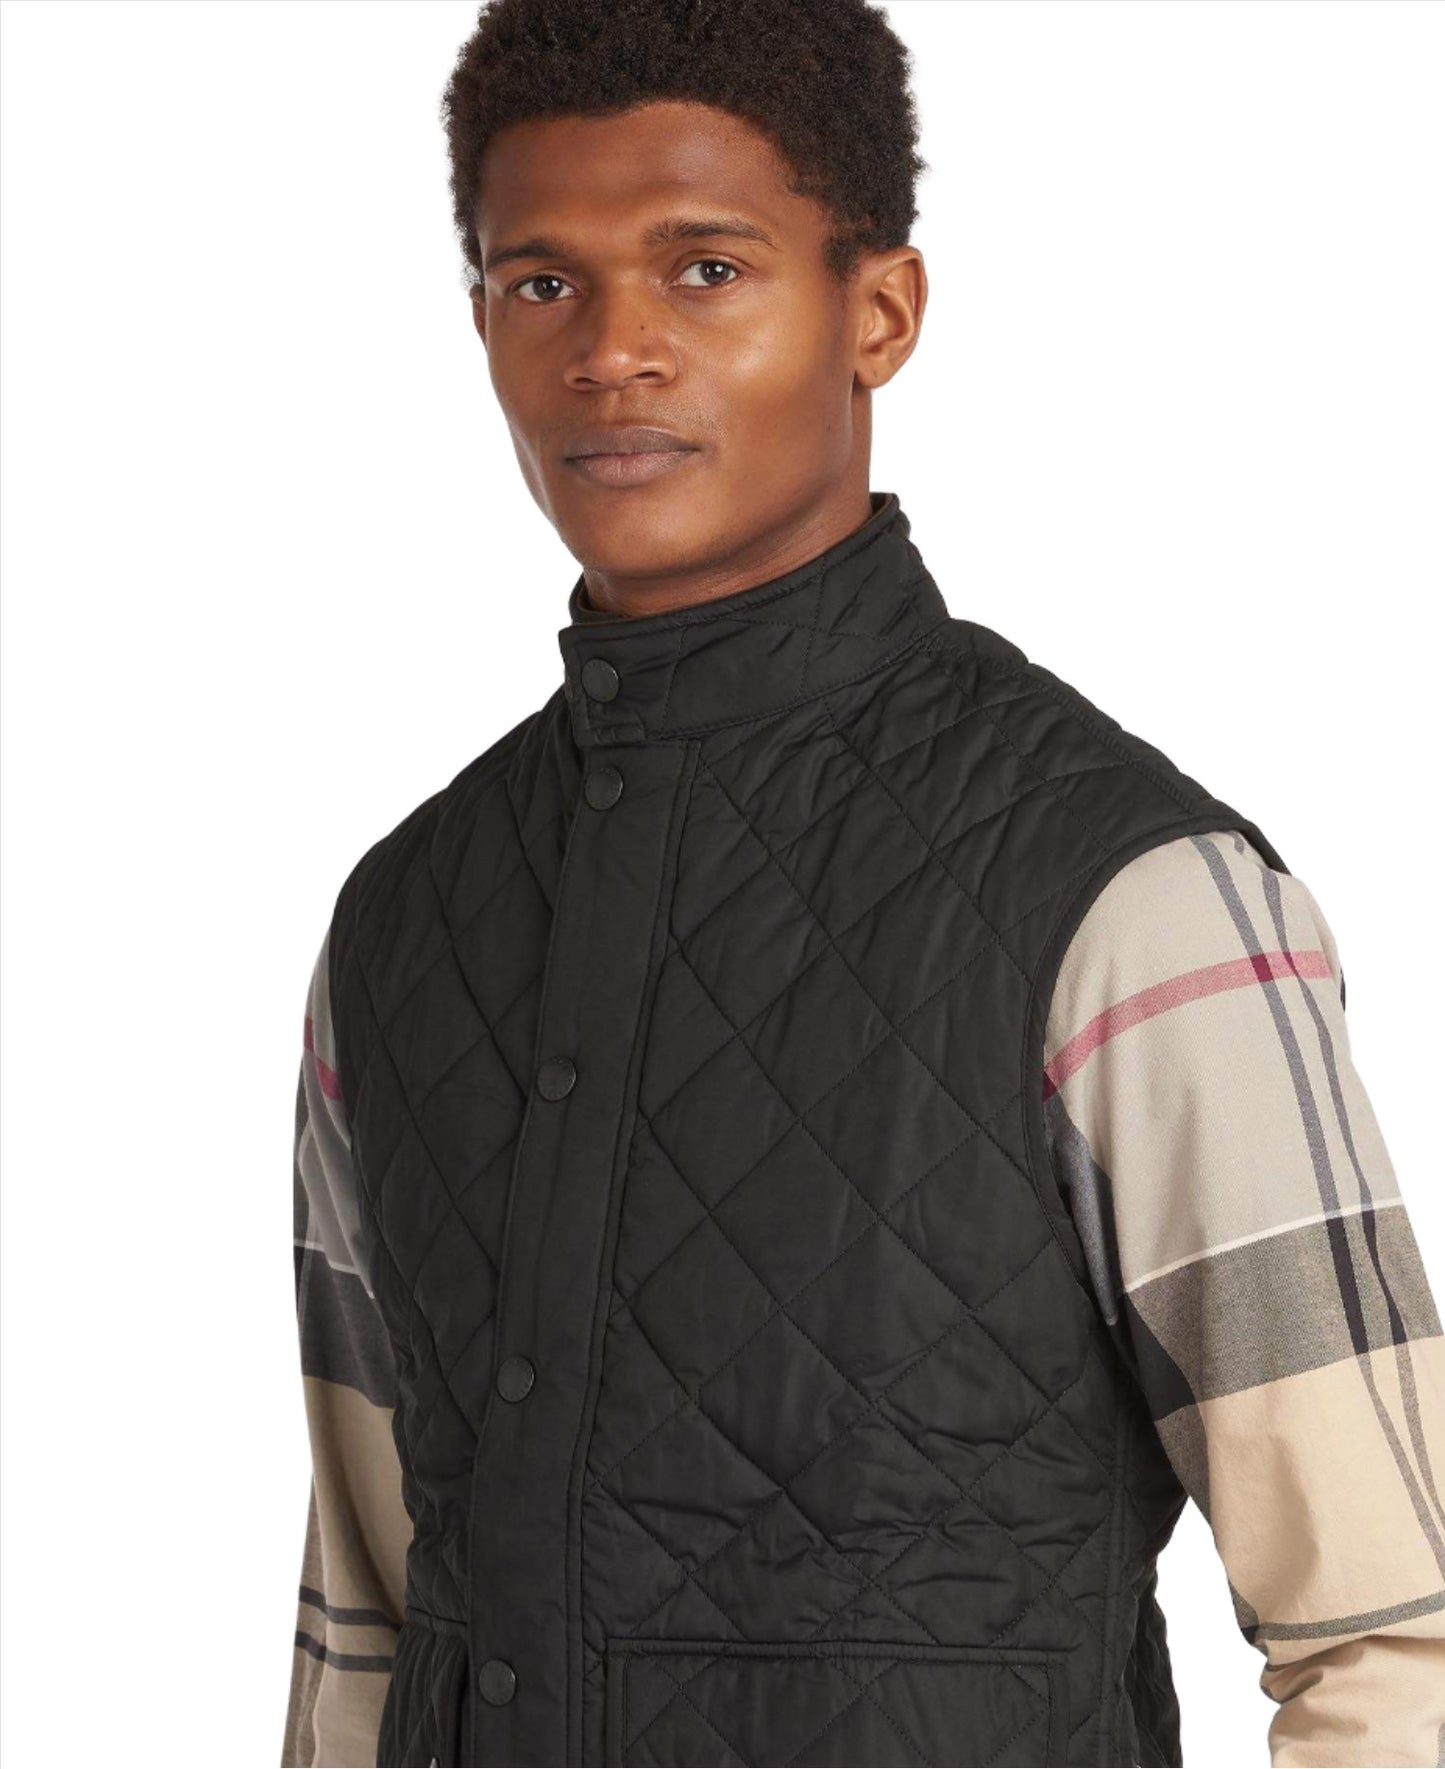 Barbour Lowerdale Gilet - The Luxury Promotional Gifts Company Limited